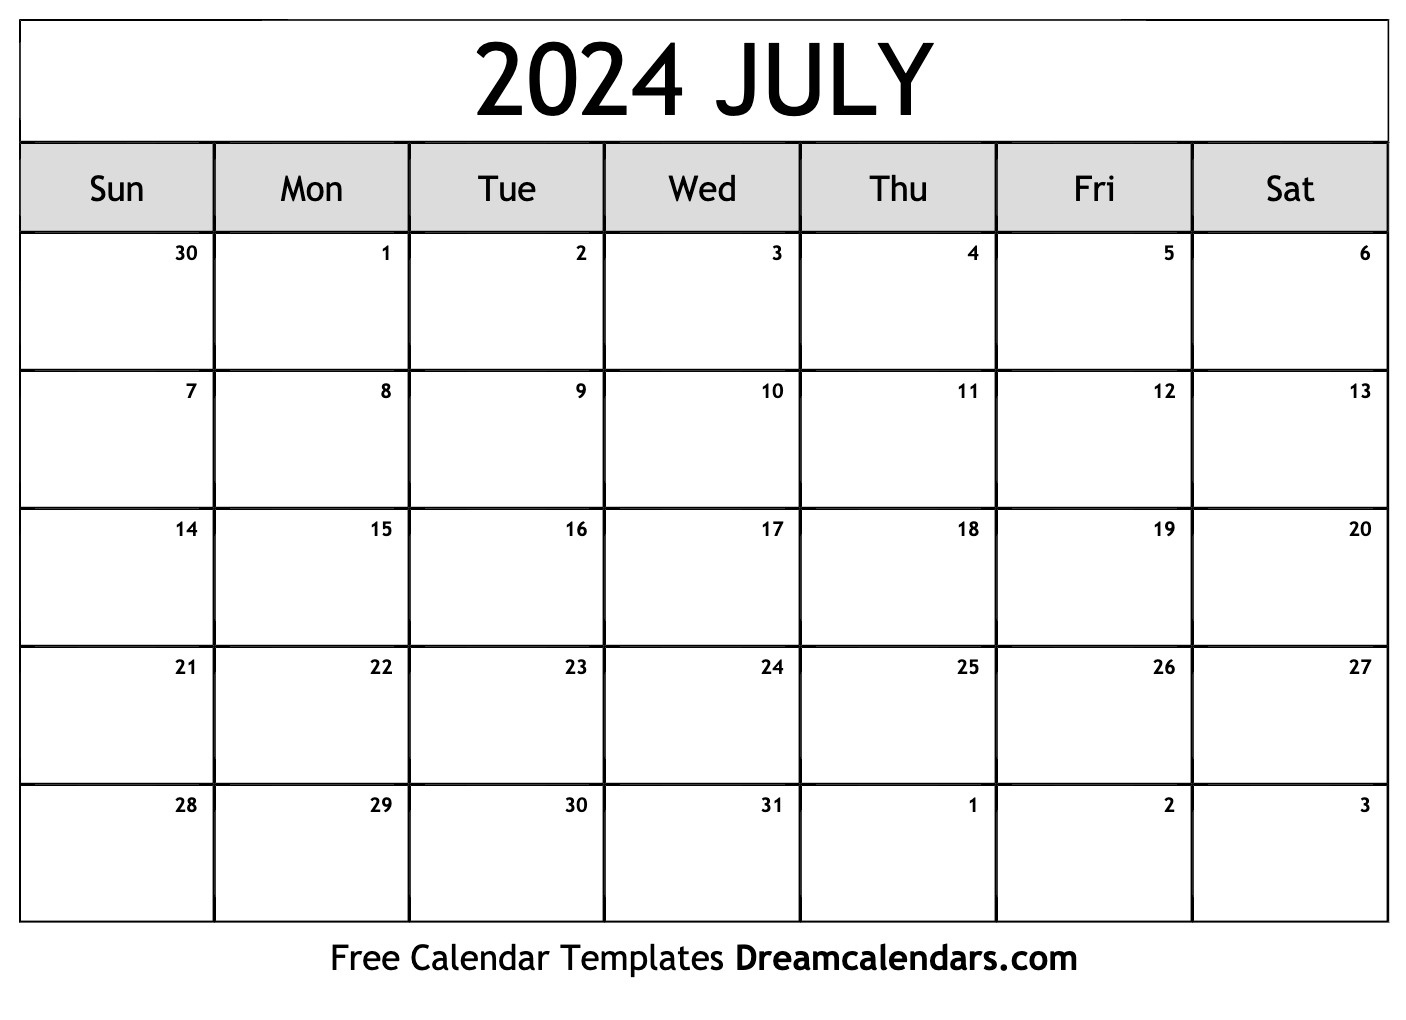 July 2024 Calendar - Free Printable With Holidays And Observances for July Saints Calendar 2024